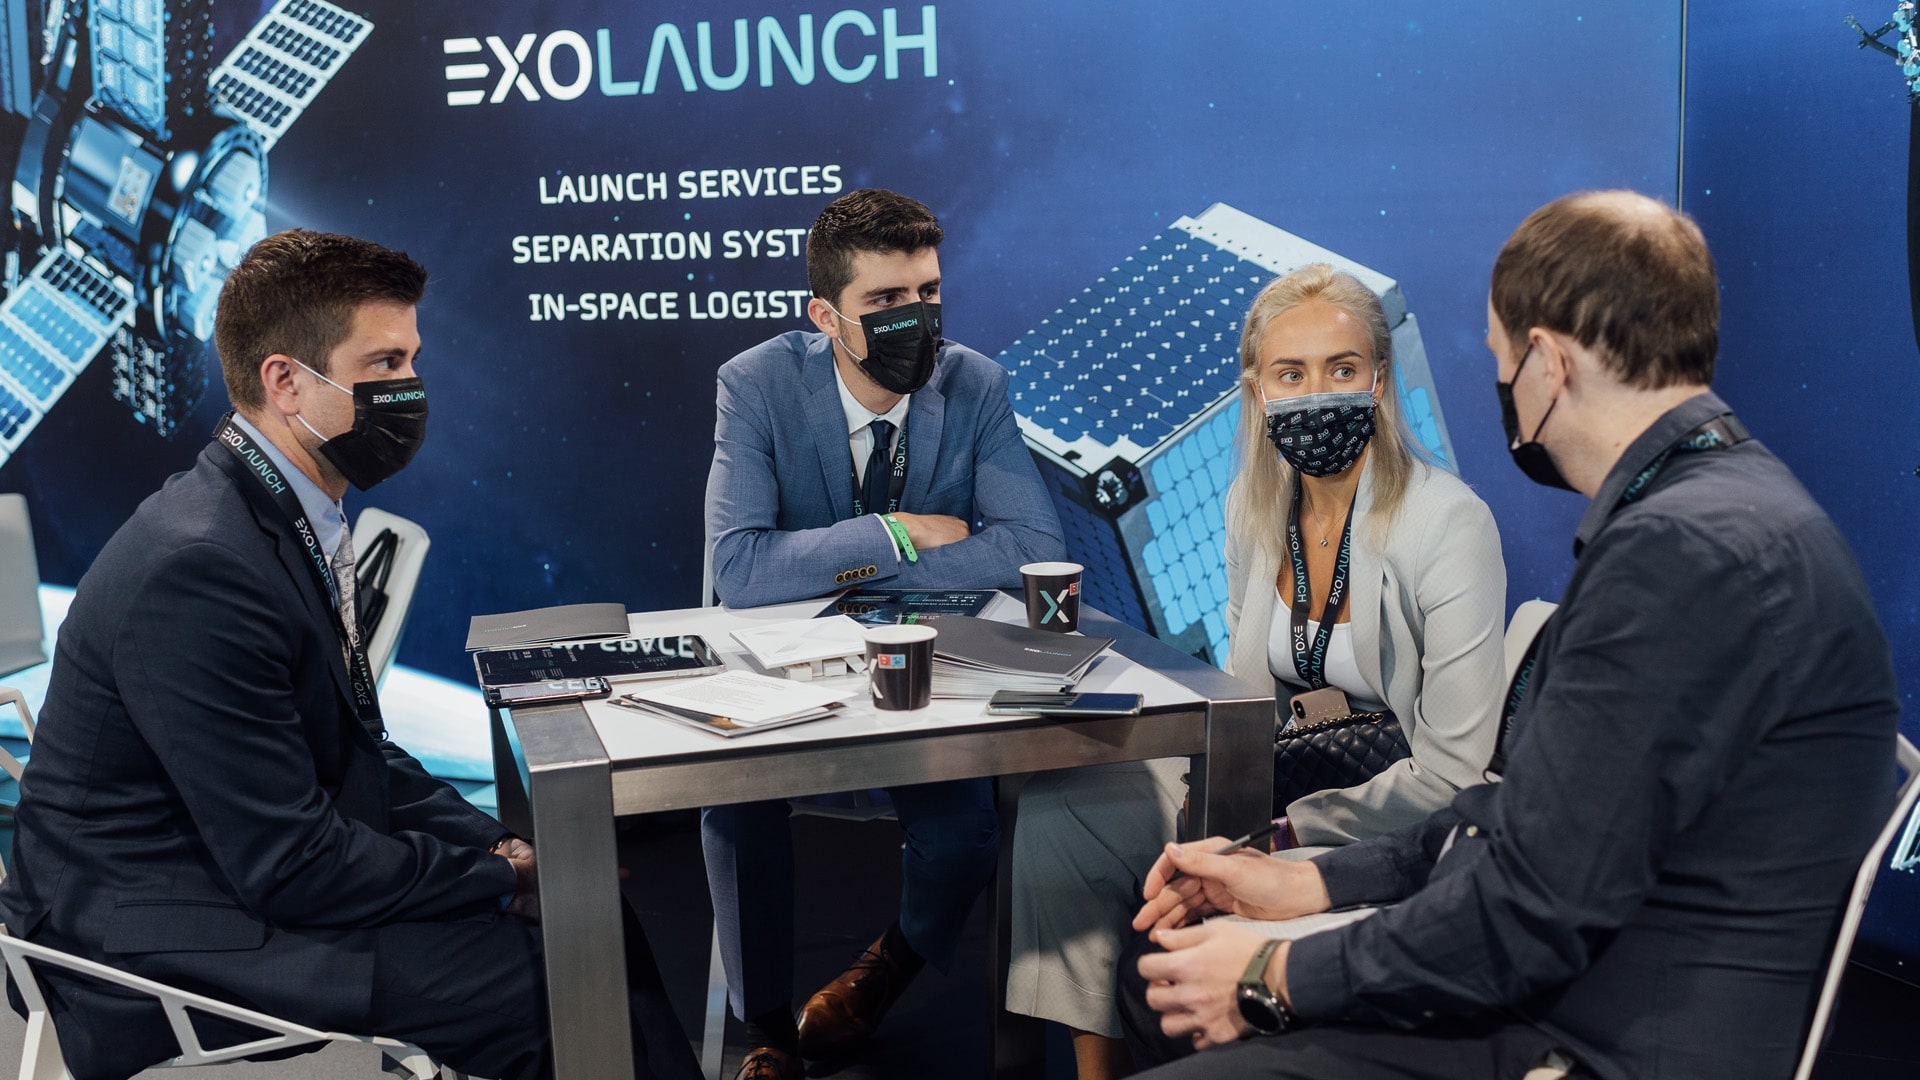 Image from Exolaunch news